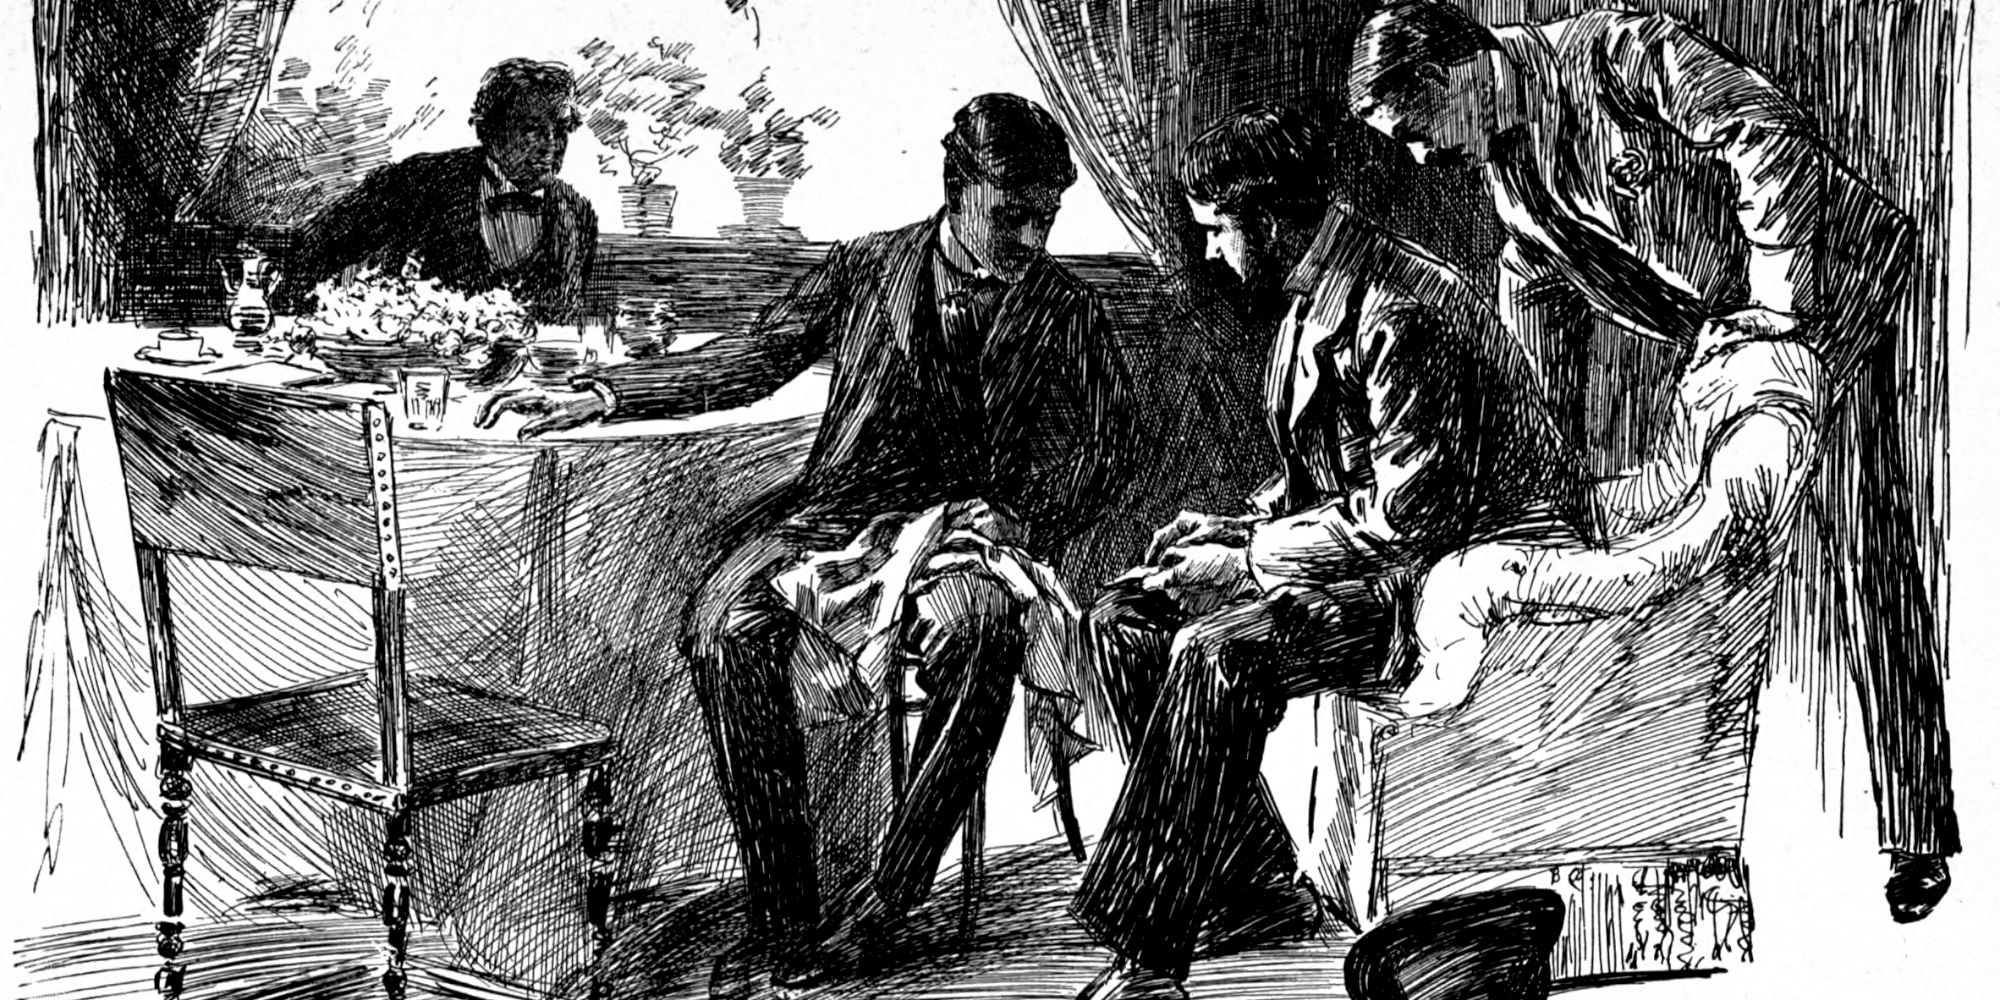 1894 Drawing of Holmes and Watson. from Memoirs of Sherlock Holmes